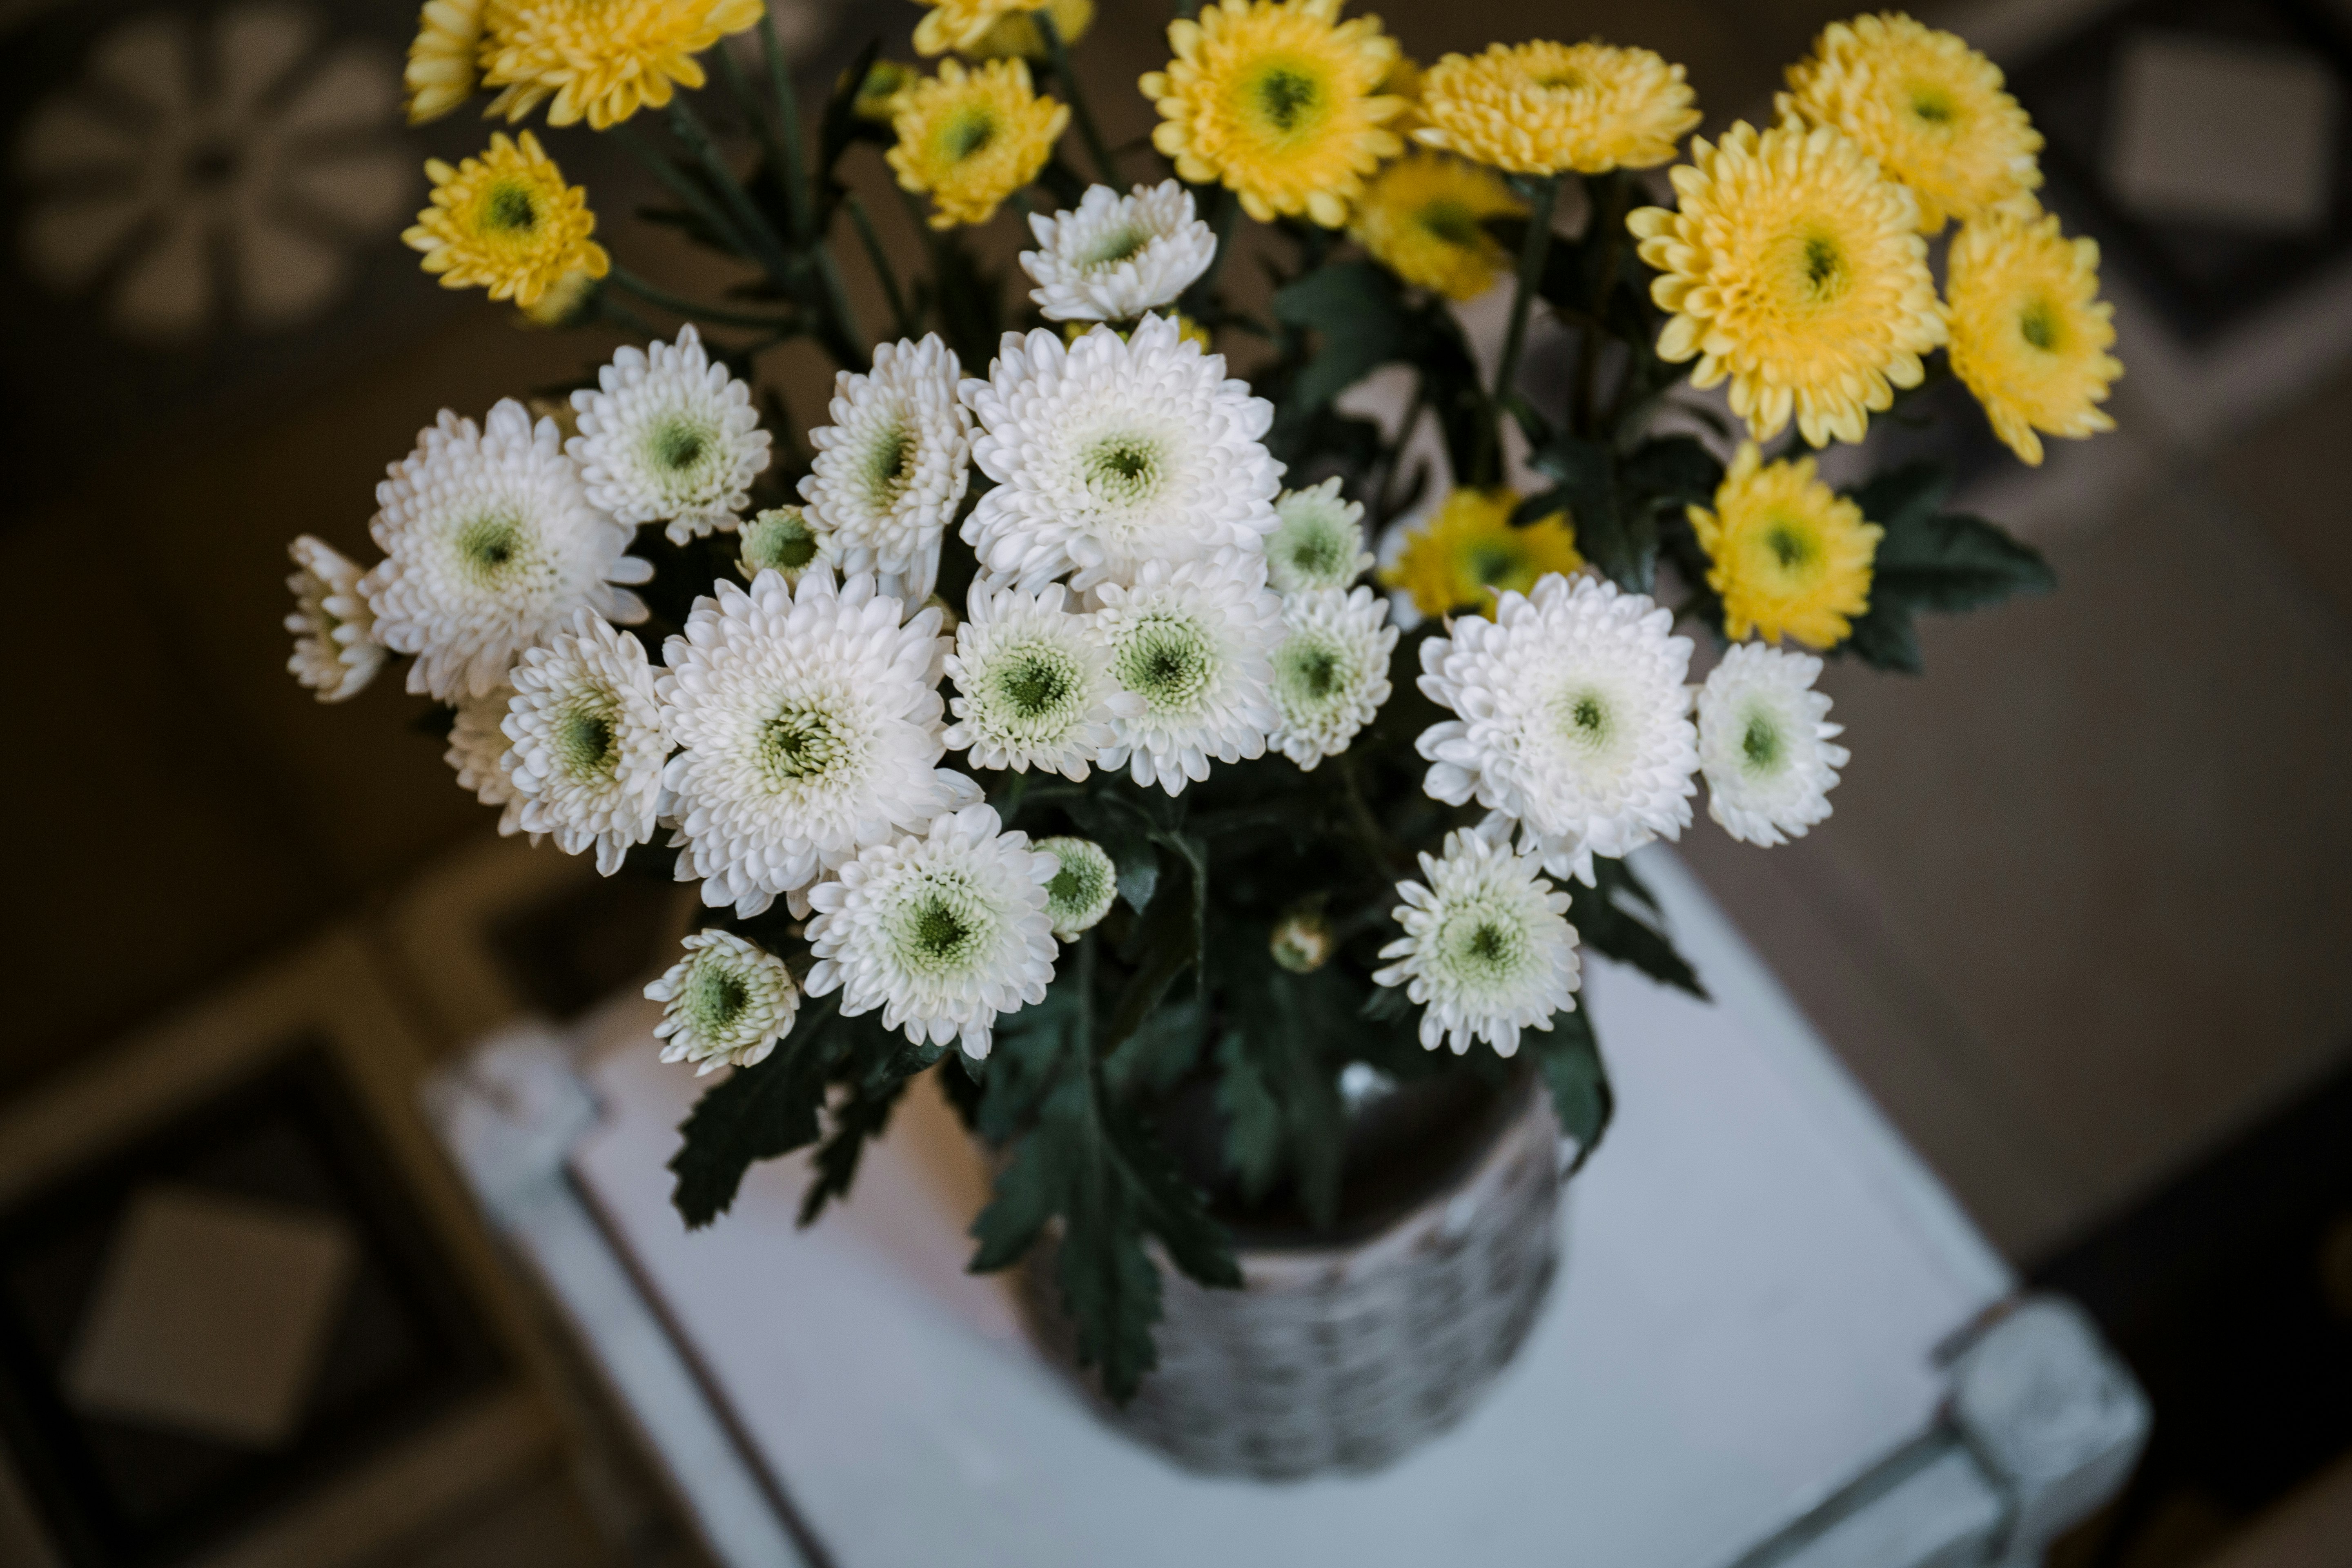 yellow and white petaled flower arrangements